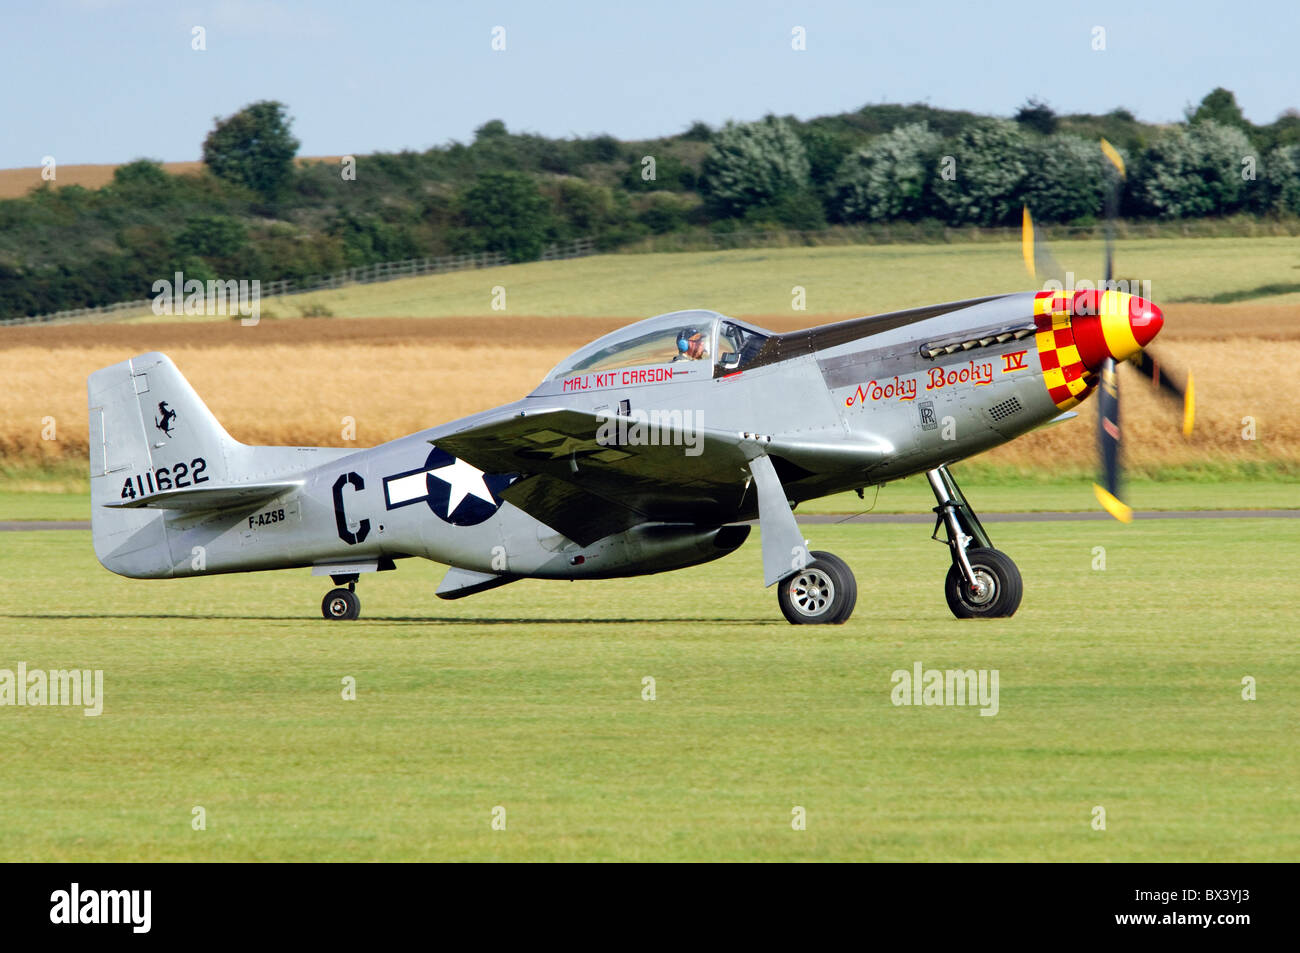 North American P-51D Mustang 'Nooky Booky' ready for take off at Duxford Flying Legends Airshow Stock Photo